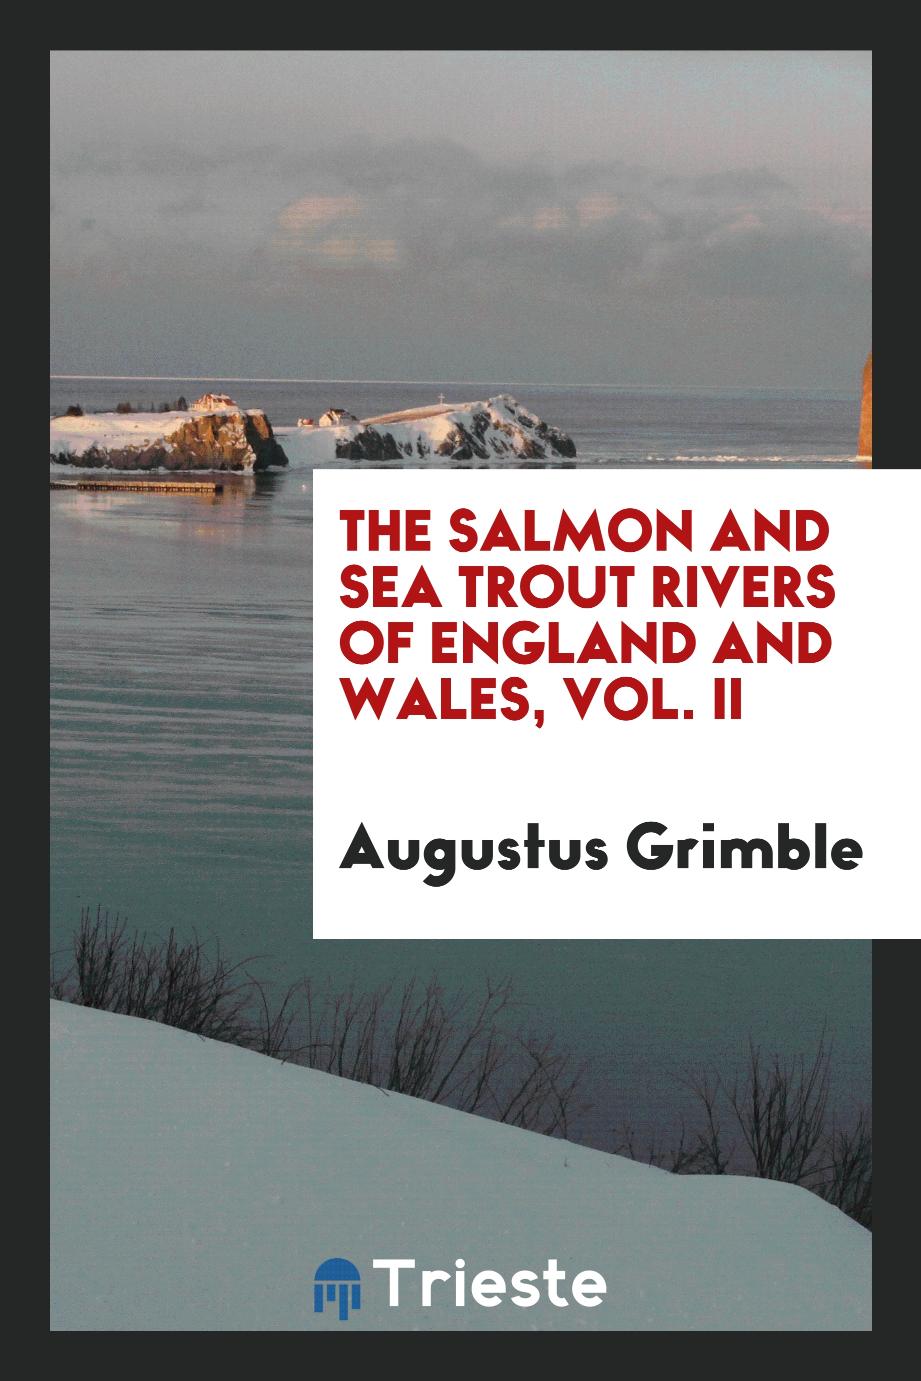 The Salmon and Sea Trout Rivers of England and Wales, Vol. II